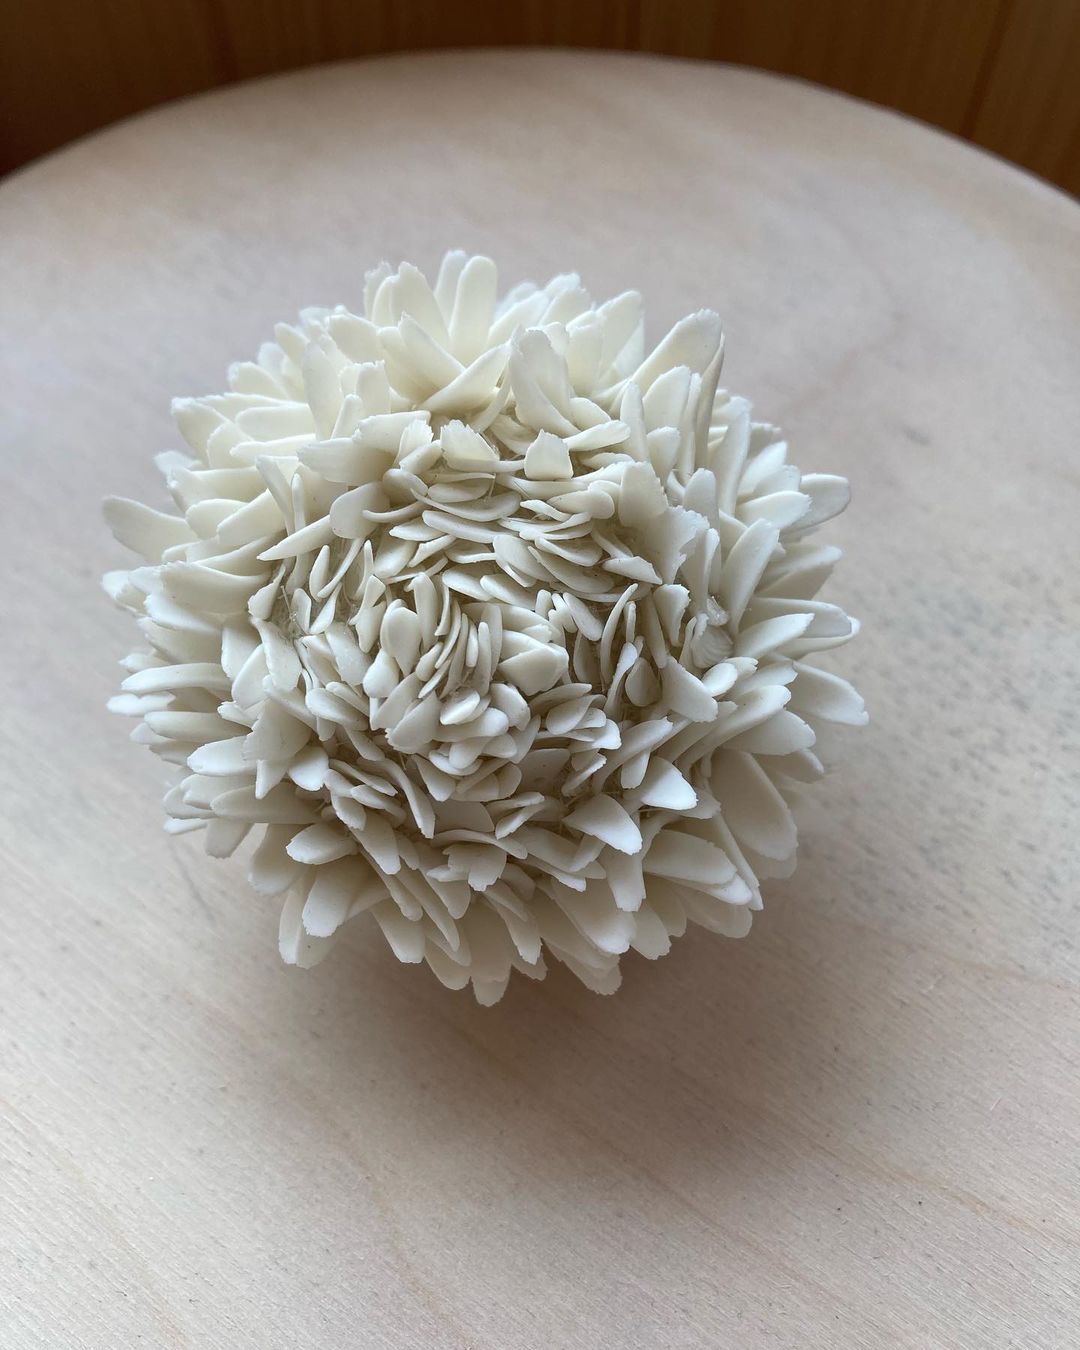 Delicate Bloom And Petal Based Ceramic Sculptures By Jennifer Hickey 5